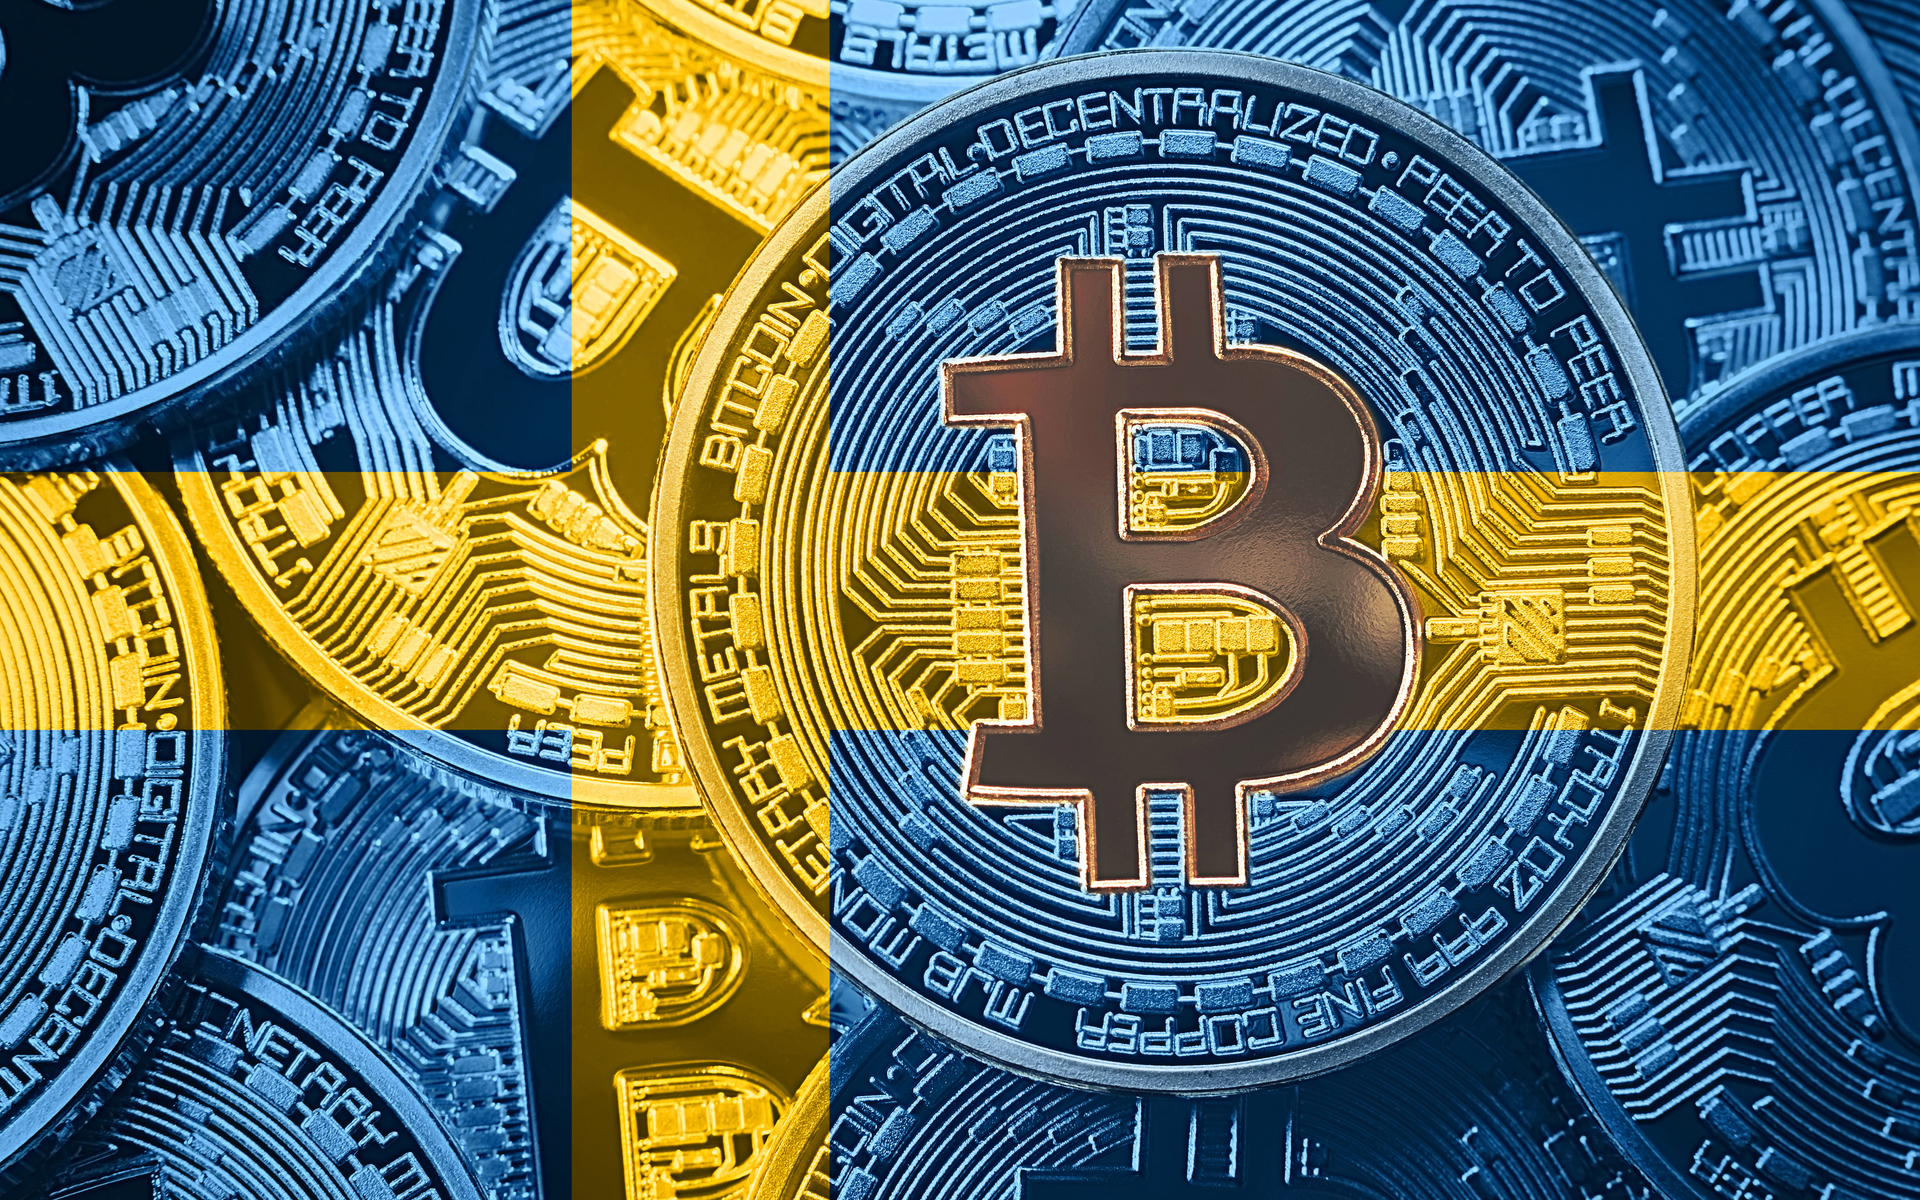 Sweden cryptocurrency tax do banks have enough money to control crypto